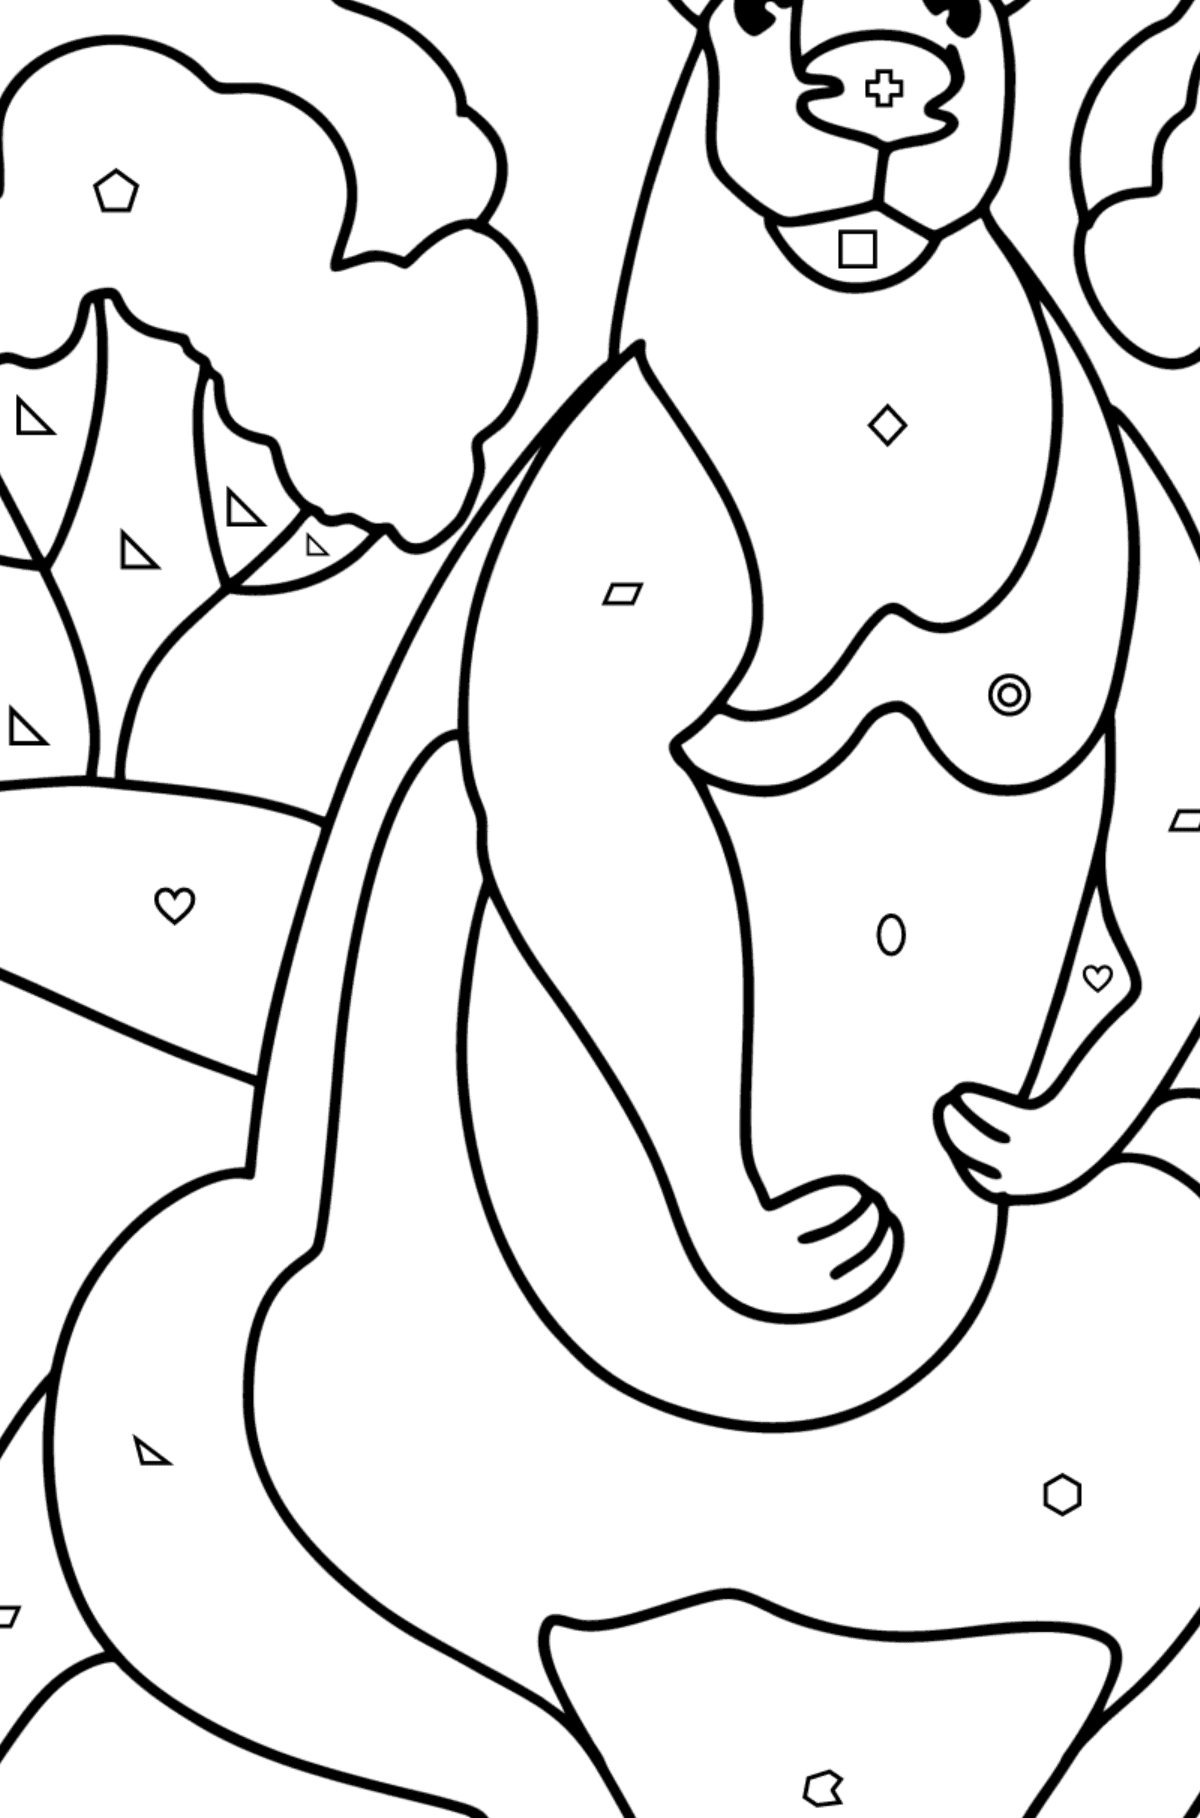 Giant Kangaroo coloring page - Coloring by Geometric Shapes for Kids